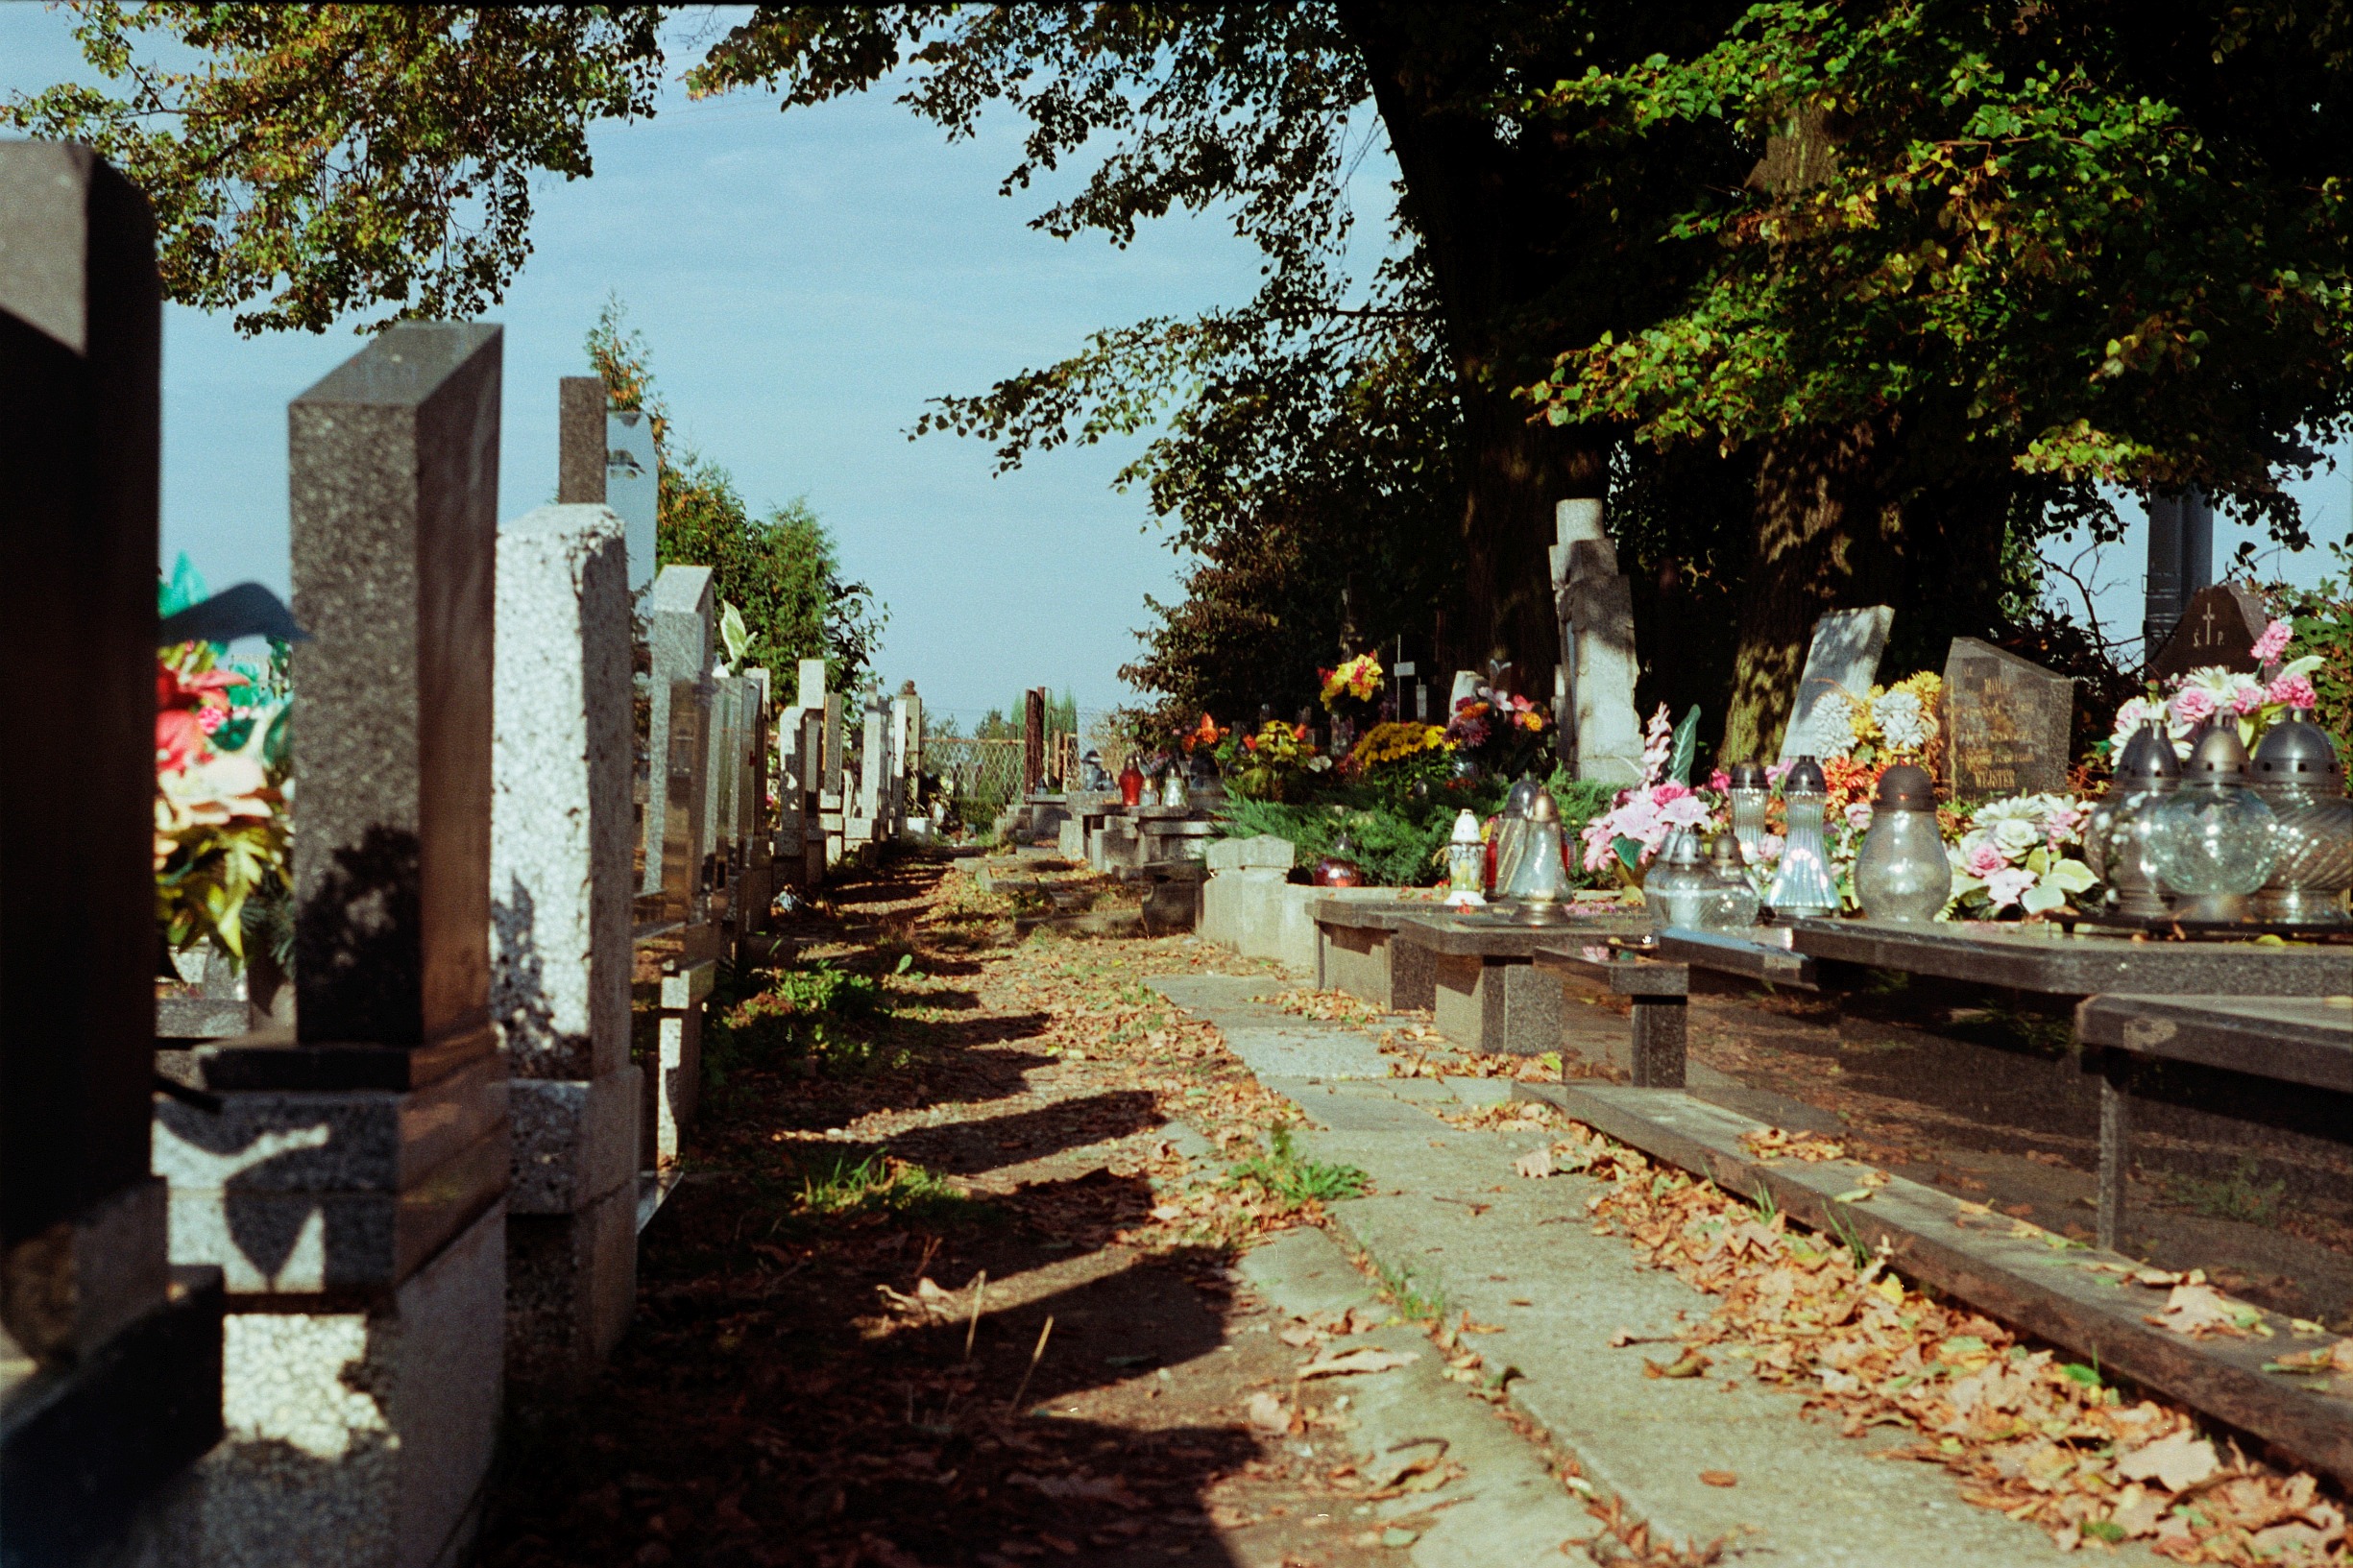 Cementary Alley#2. Photo: Pawel Pajak. (CC BY-NC 2.0).